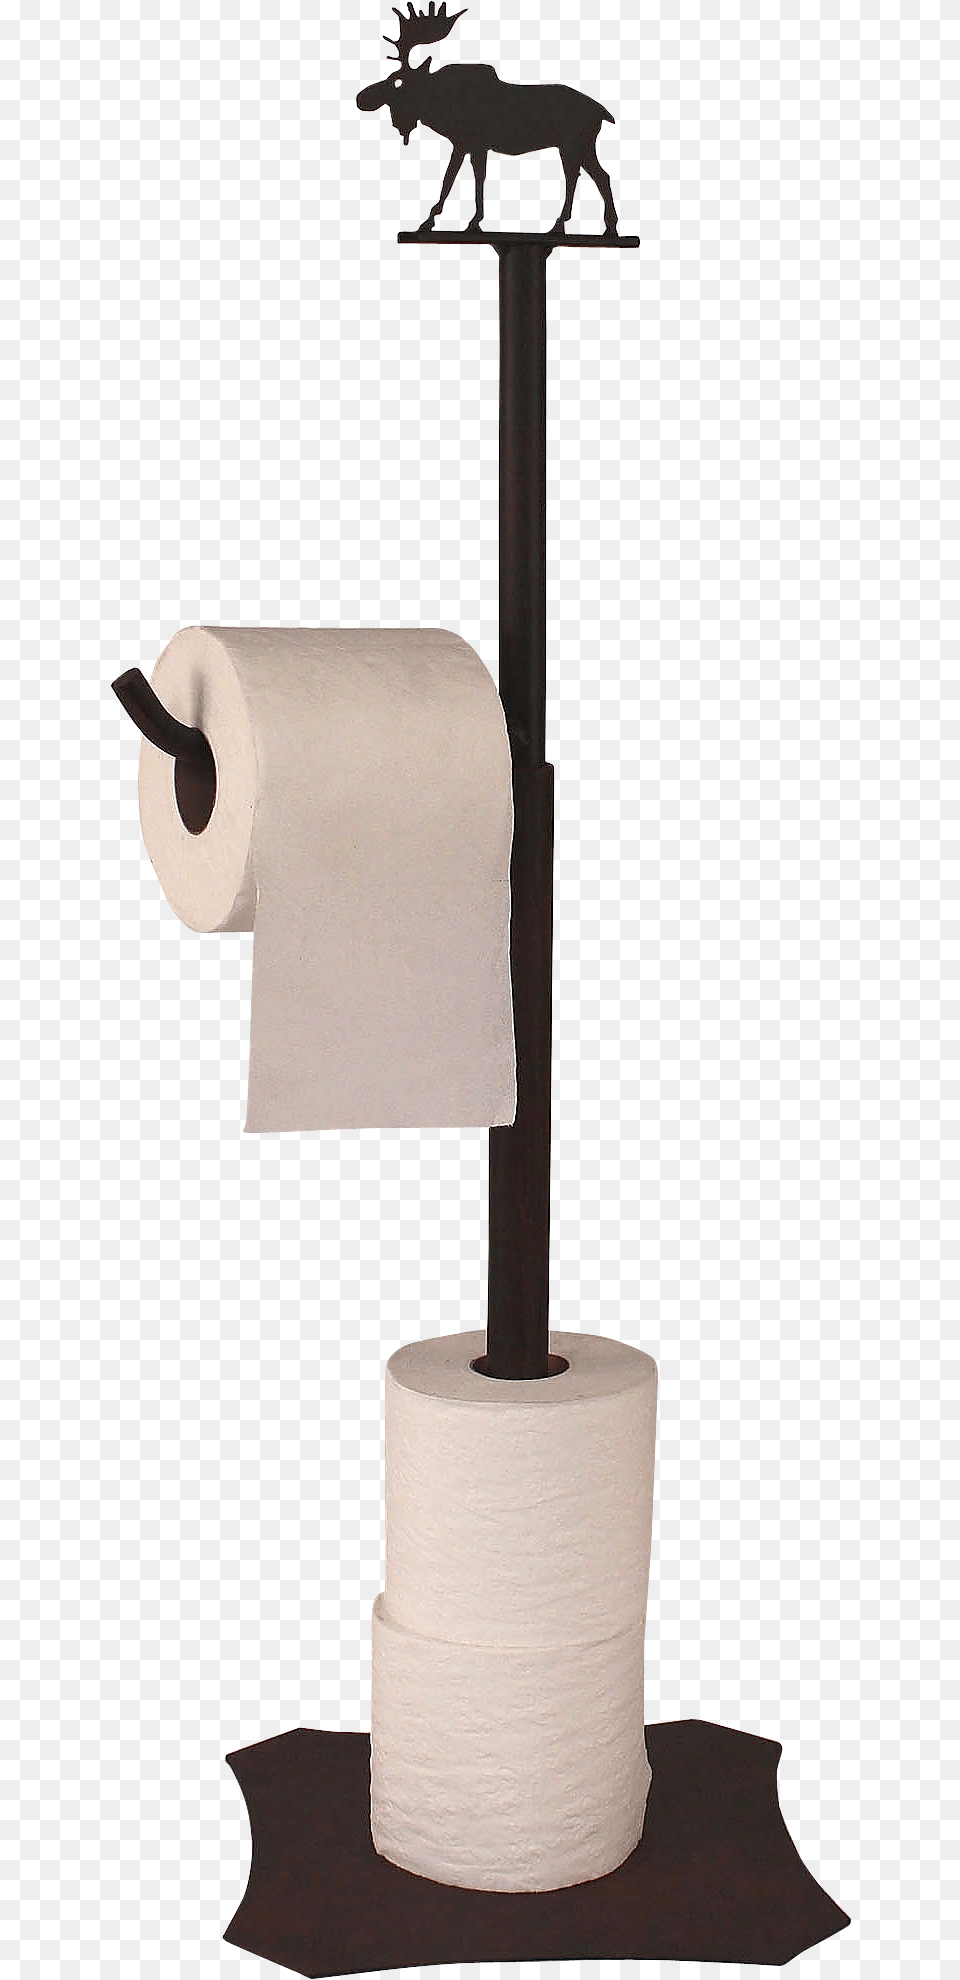 Toilet Roll Holder, Paper, Paper Towel, Tissue, Toilet Paper Free Transparent Png